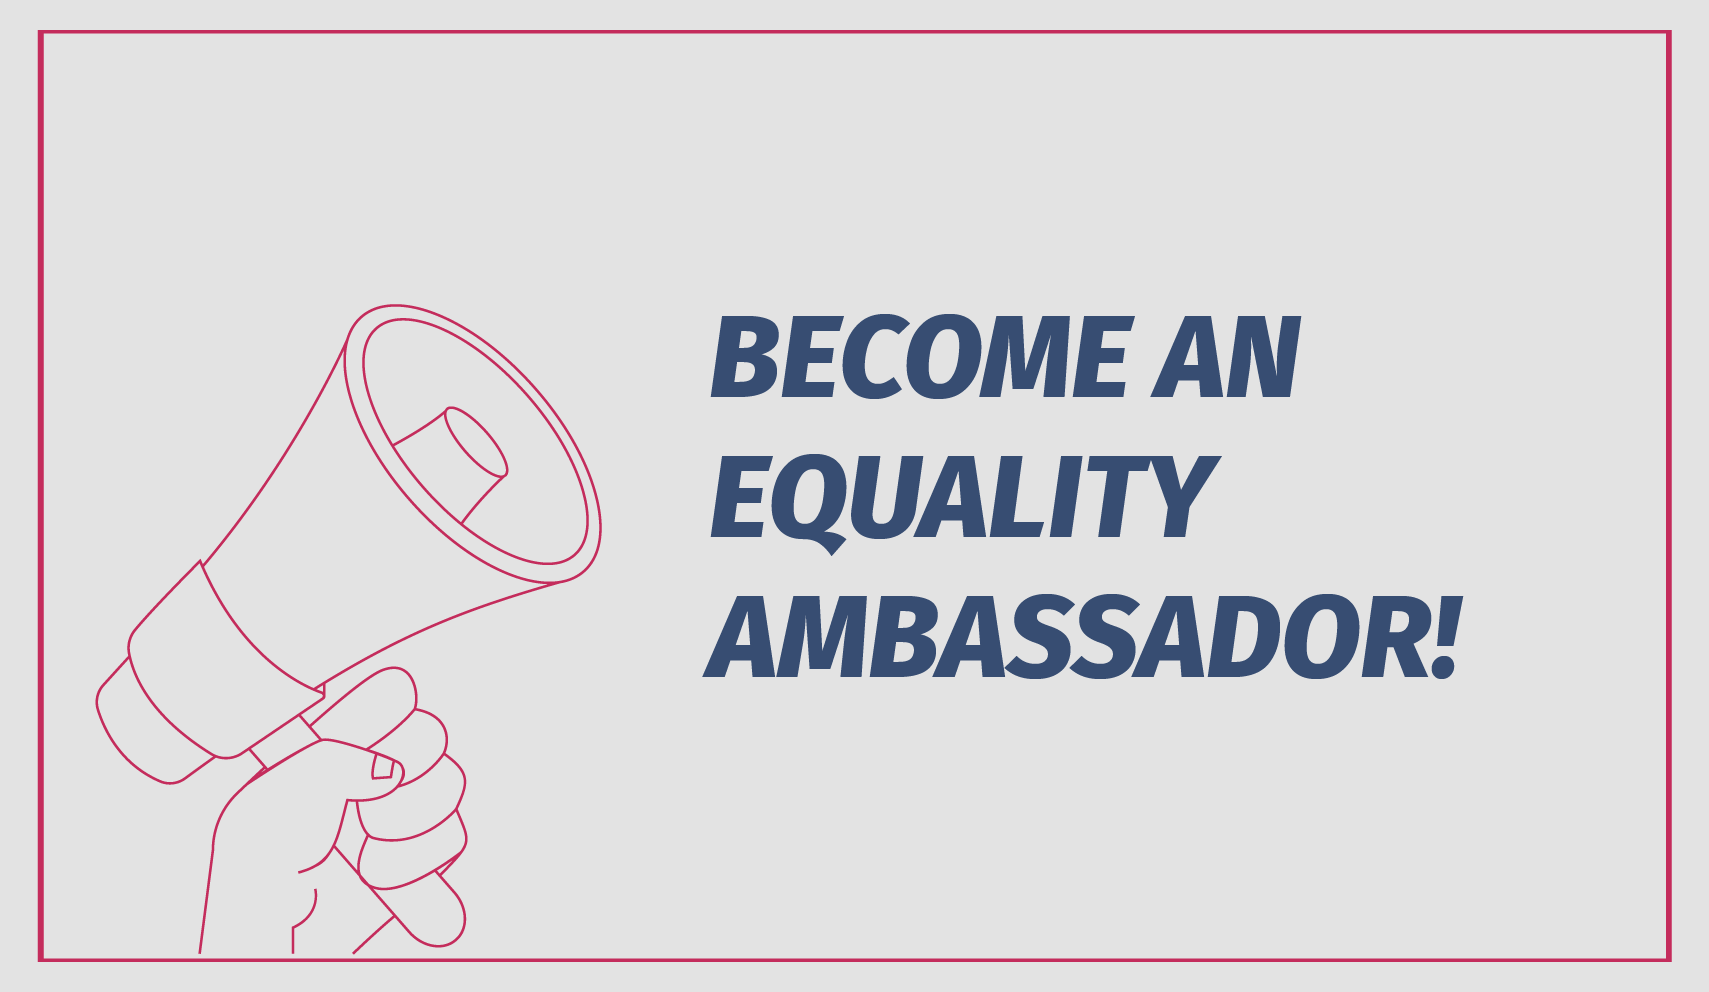 Become an Equality Ambassador - Council of Europe Office in Georgia is announcing a competition